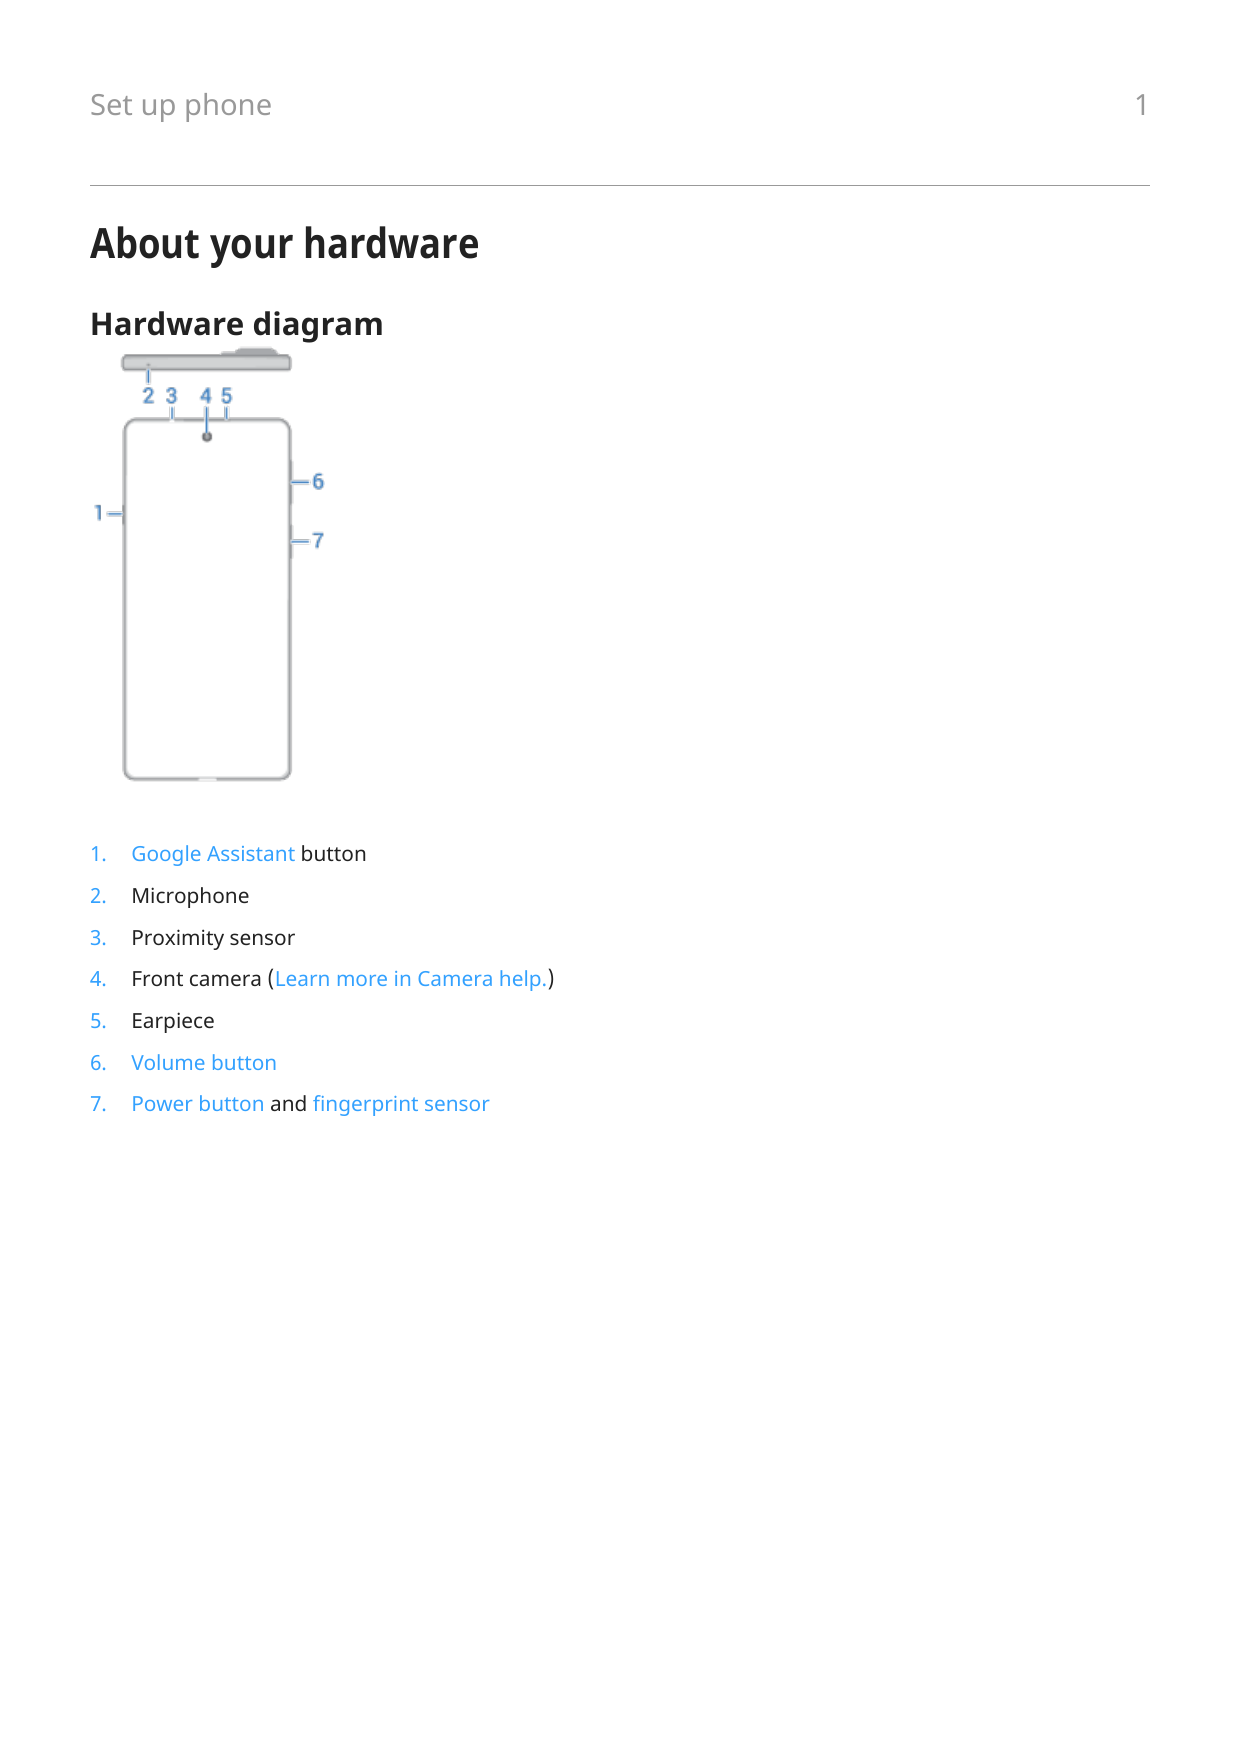 Set up phoneAbout your hardwareHardware diagram1.Google Assistant button2.Microphone3.Proximity sensor4.Front camera (Learn more